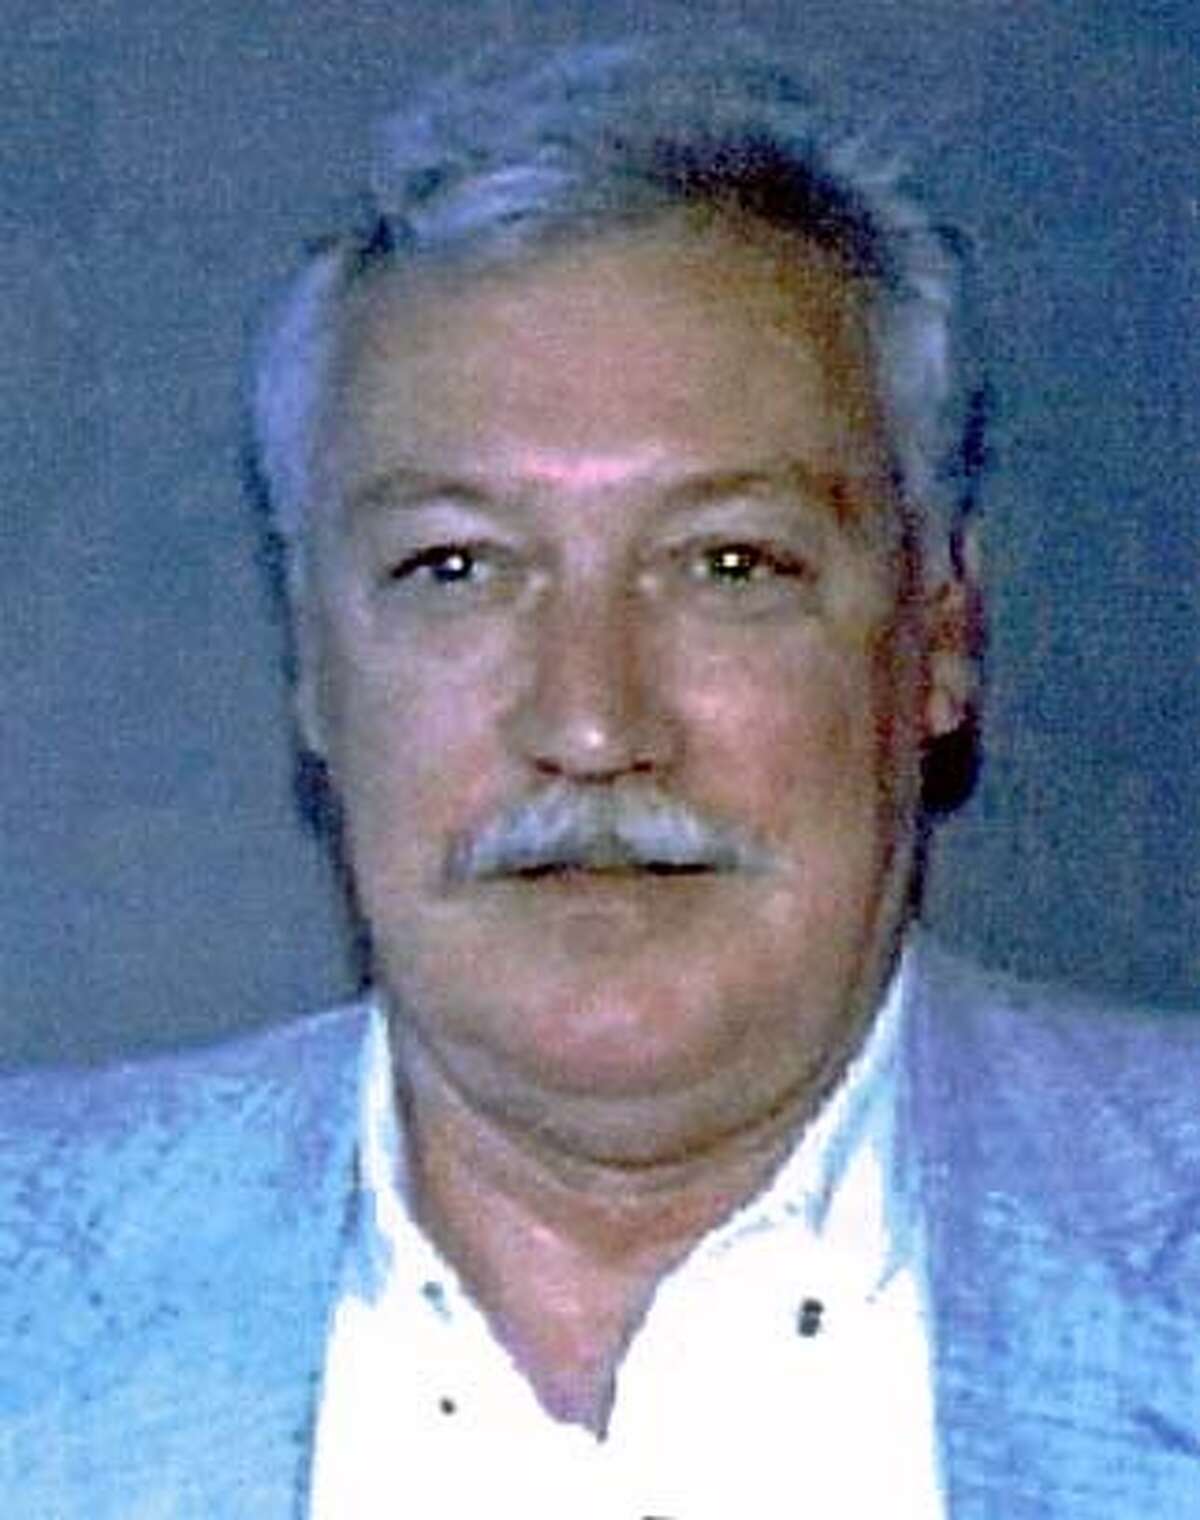 Bill Shaline, 57, of Sacramento, Calif., is shown in this California Department of Motor Vehicles photo, date unknown. Shaline, an inspector with the California Department of Food and Agriculture, was one of three people shot and killed at a sausage factory in San Leandro, Calif., Wednesday, June 22, 2000, according to officials. Shaline was with the CDFA for more than 30 years. (AP Photo/ Calif. Dept of Motor Vehicles) Ran on: 10-20-2004 Stuart Alexander was found guilty of three counts of first-degree murder. CAT